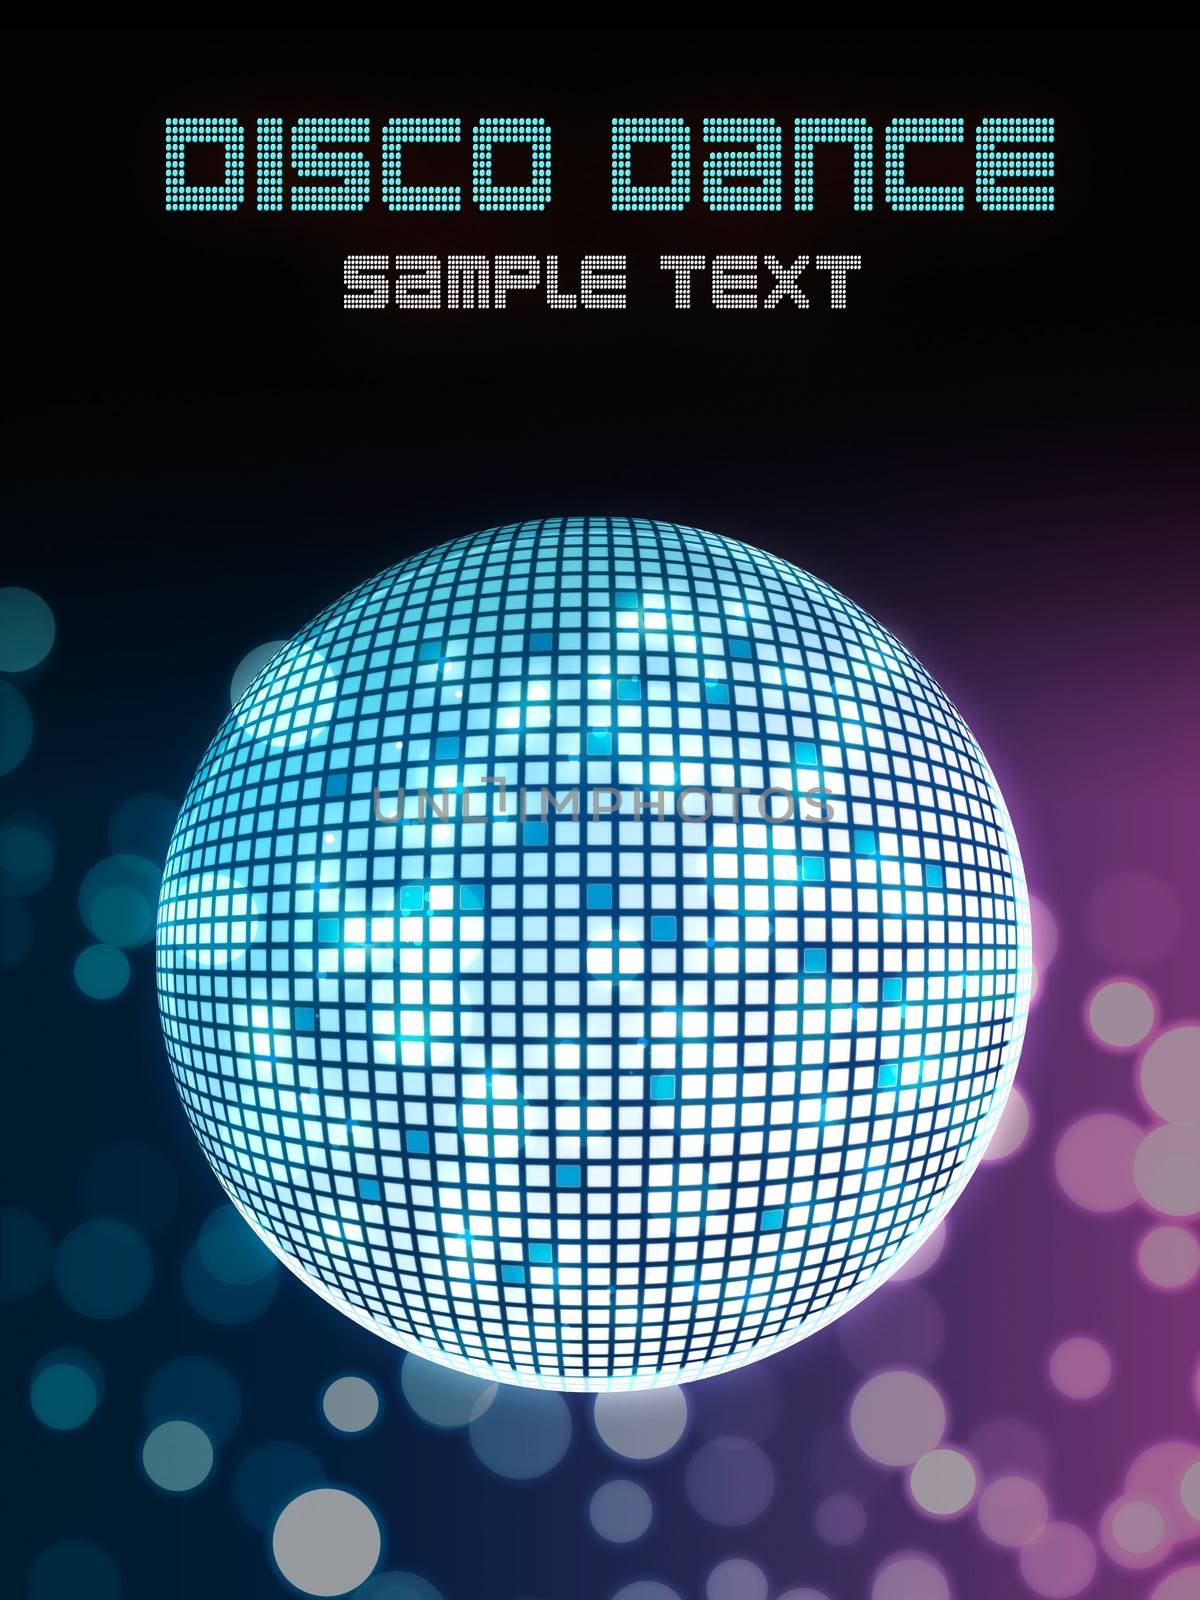 Disco ball poster background for party event by simpson33